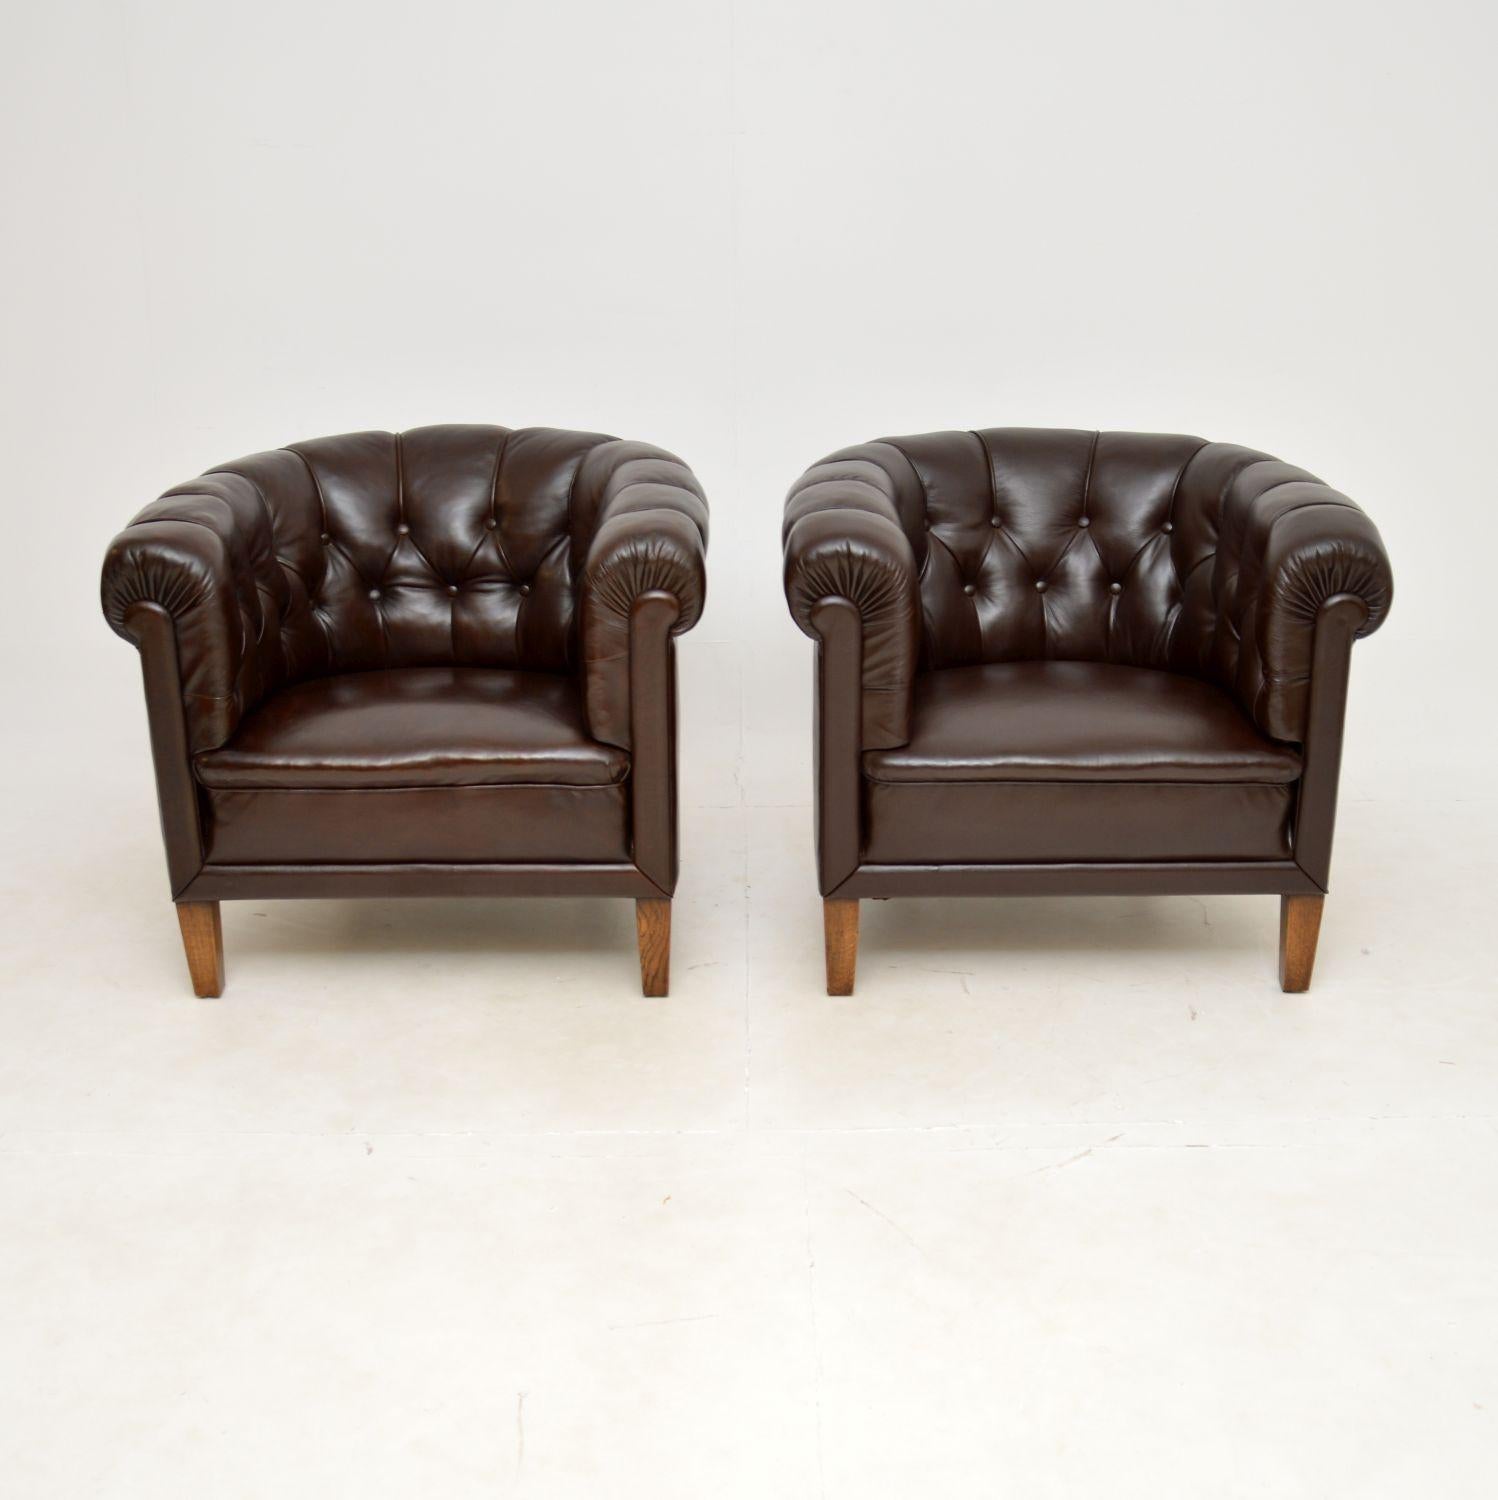 A fantastic pair of antique Swedish leather club chairs. They were recently imported from Sweden, they date from around the 1930s.

The quality is outstanding, they are extremely well made and are very comfortable. The solid and heavy frames are